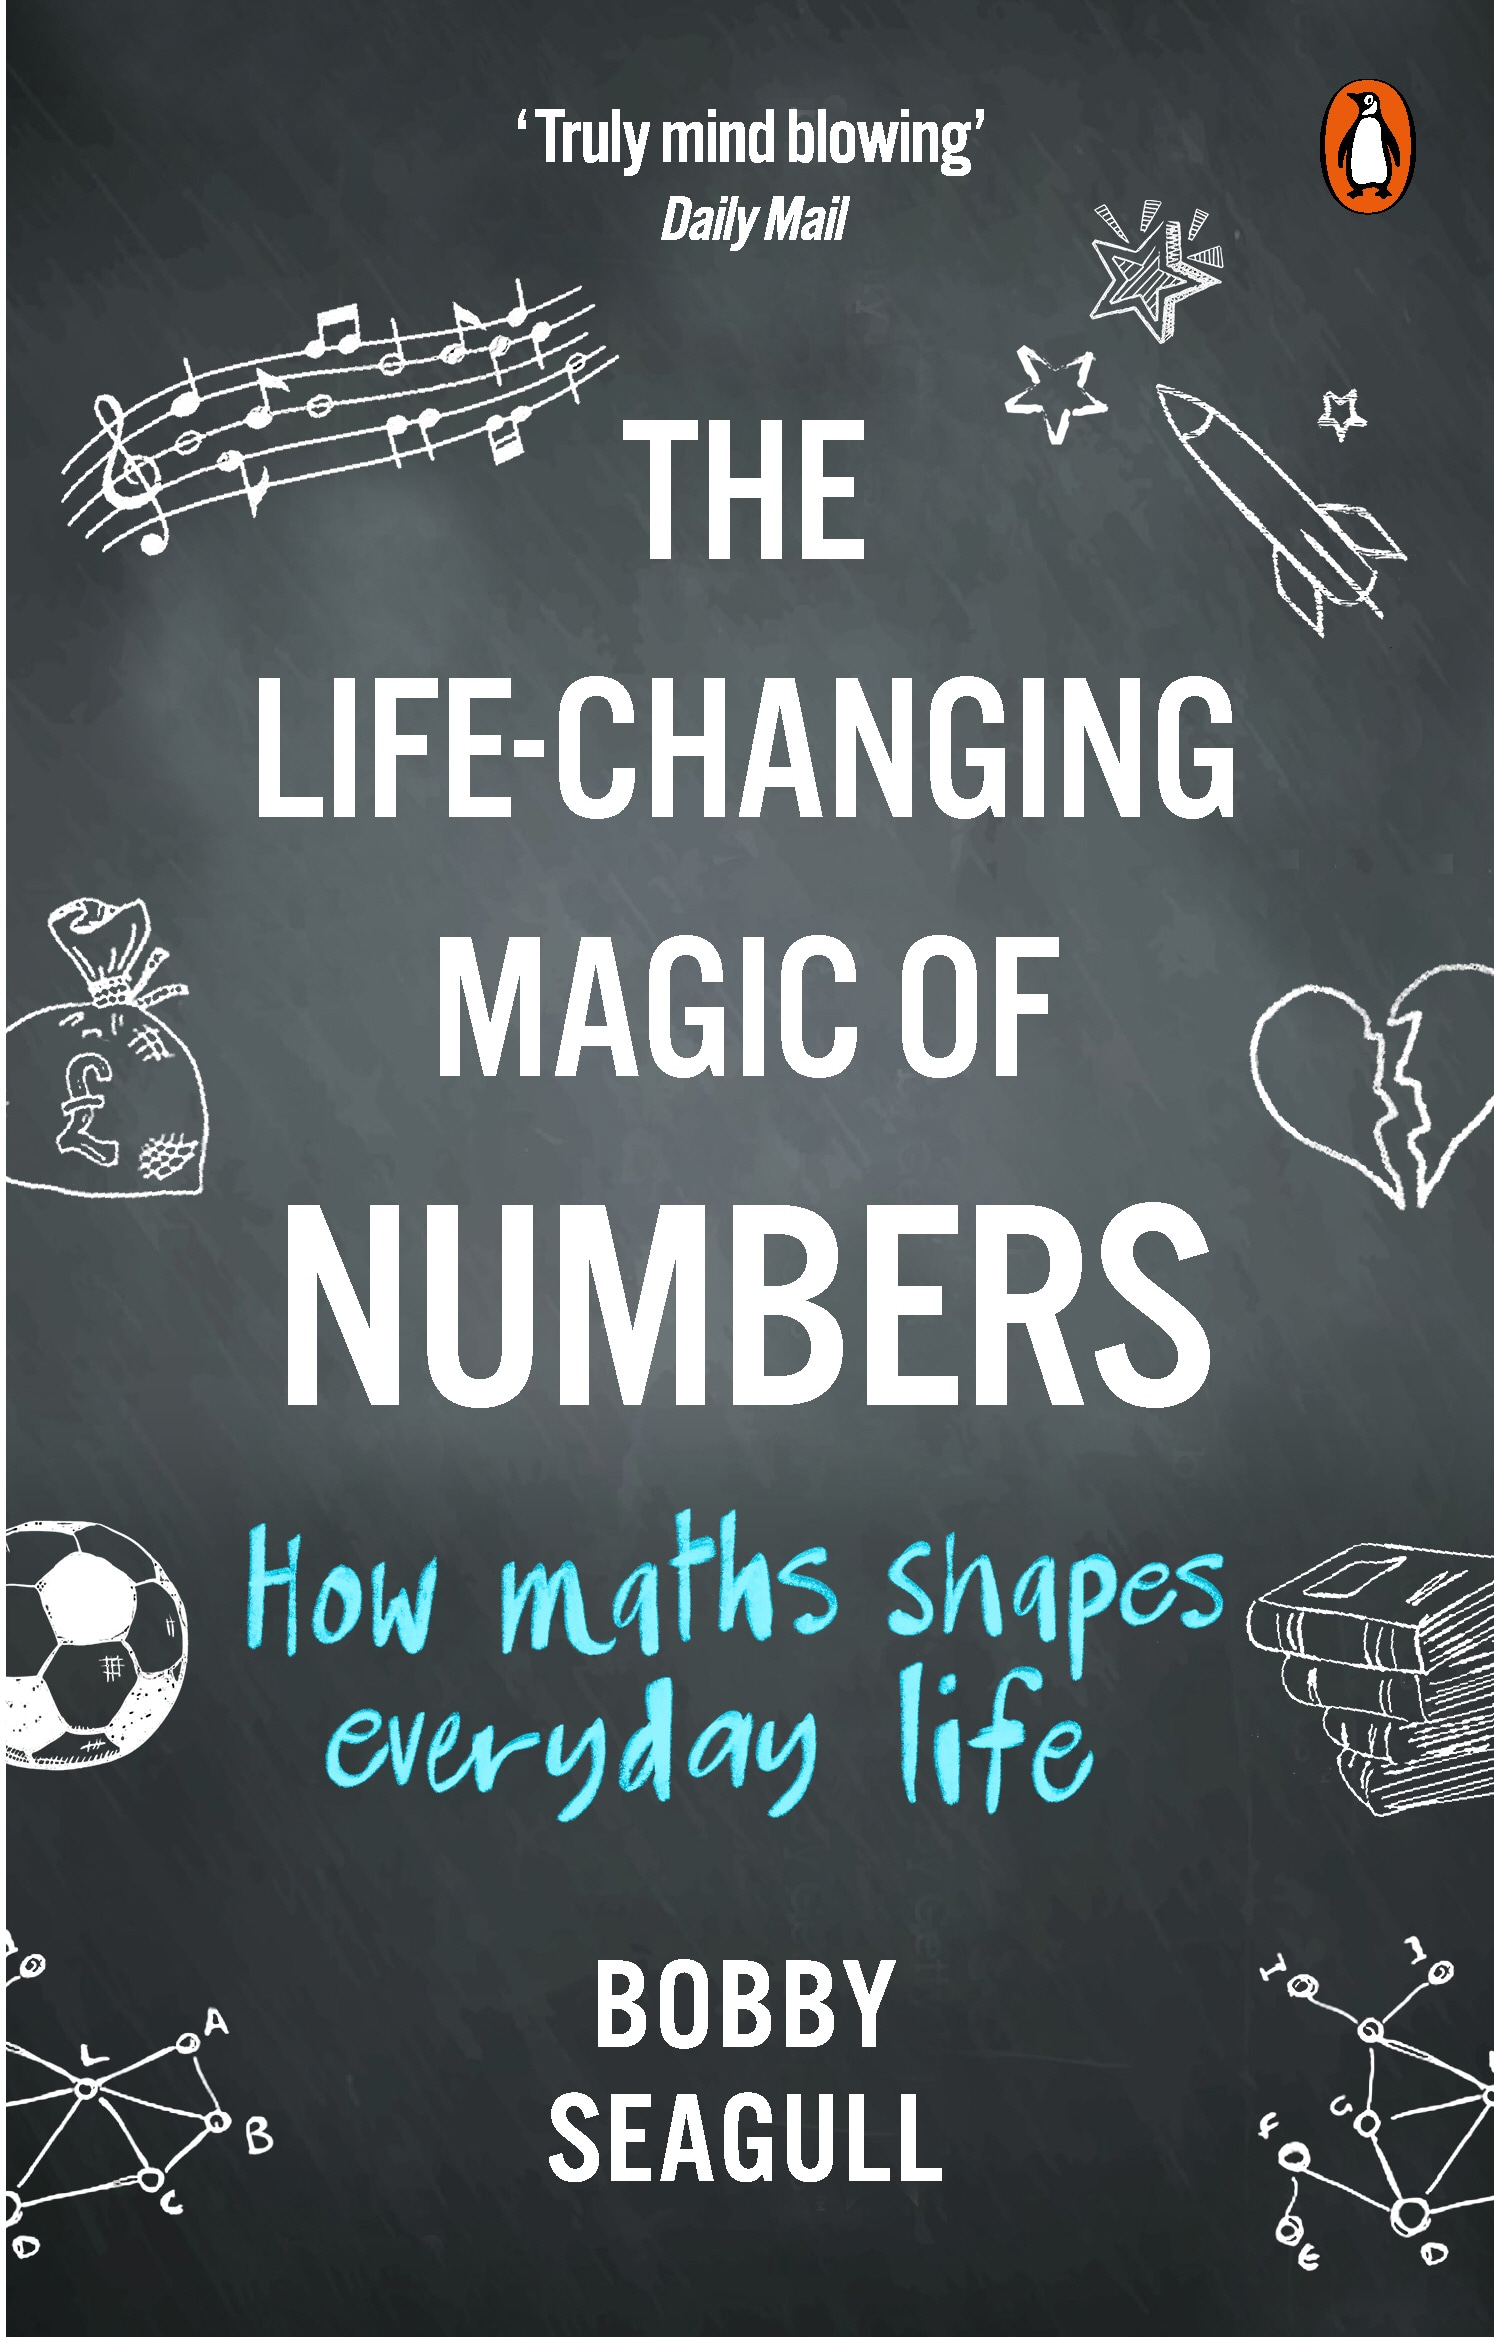 Book “The Life-Changing Magic of Numbers” by Bobby Seagull — July 4, 2019